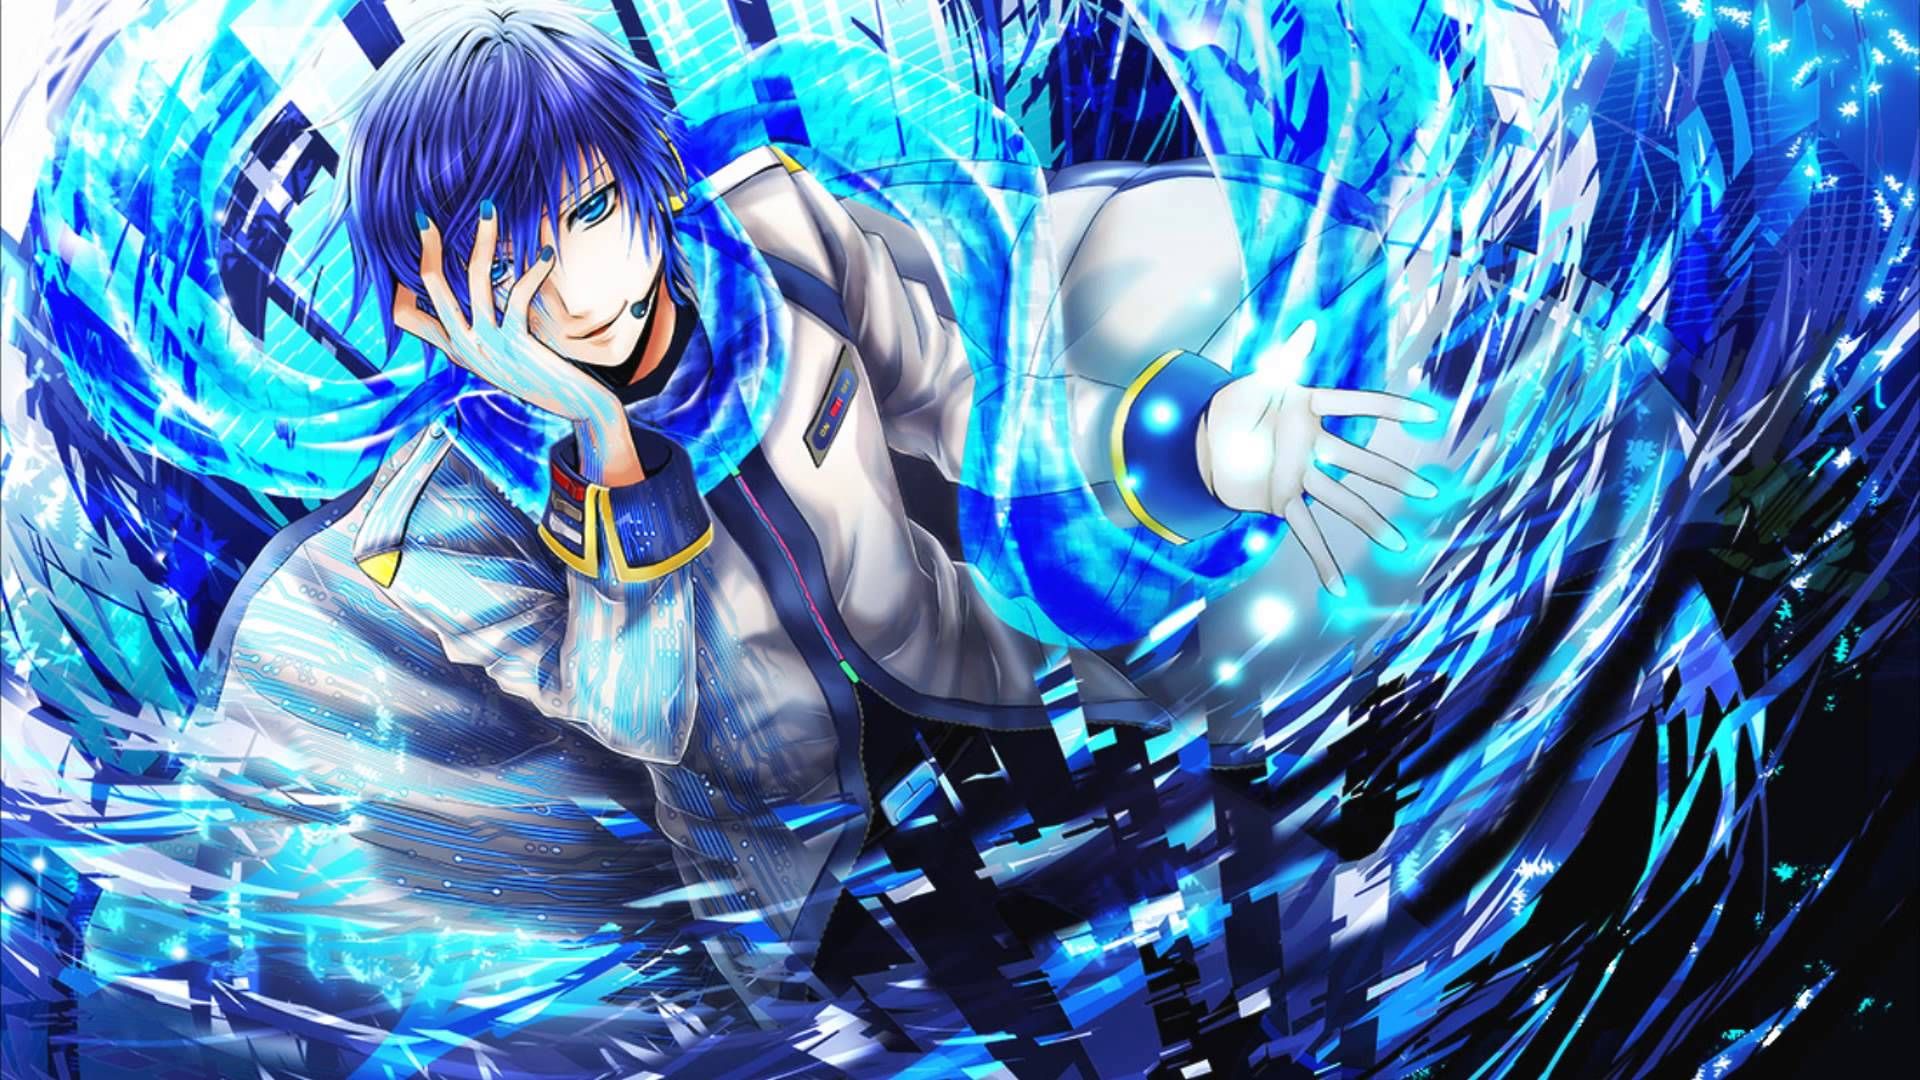 HD Kaito Vocaloid Background Wallpaper Image